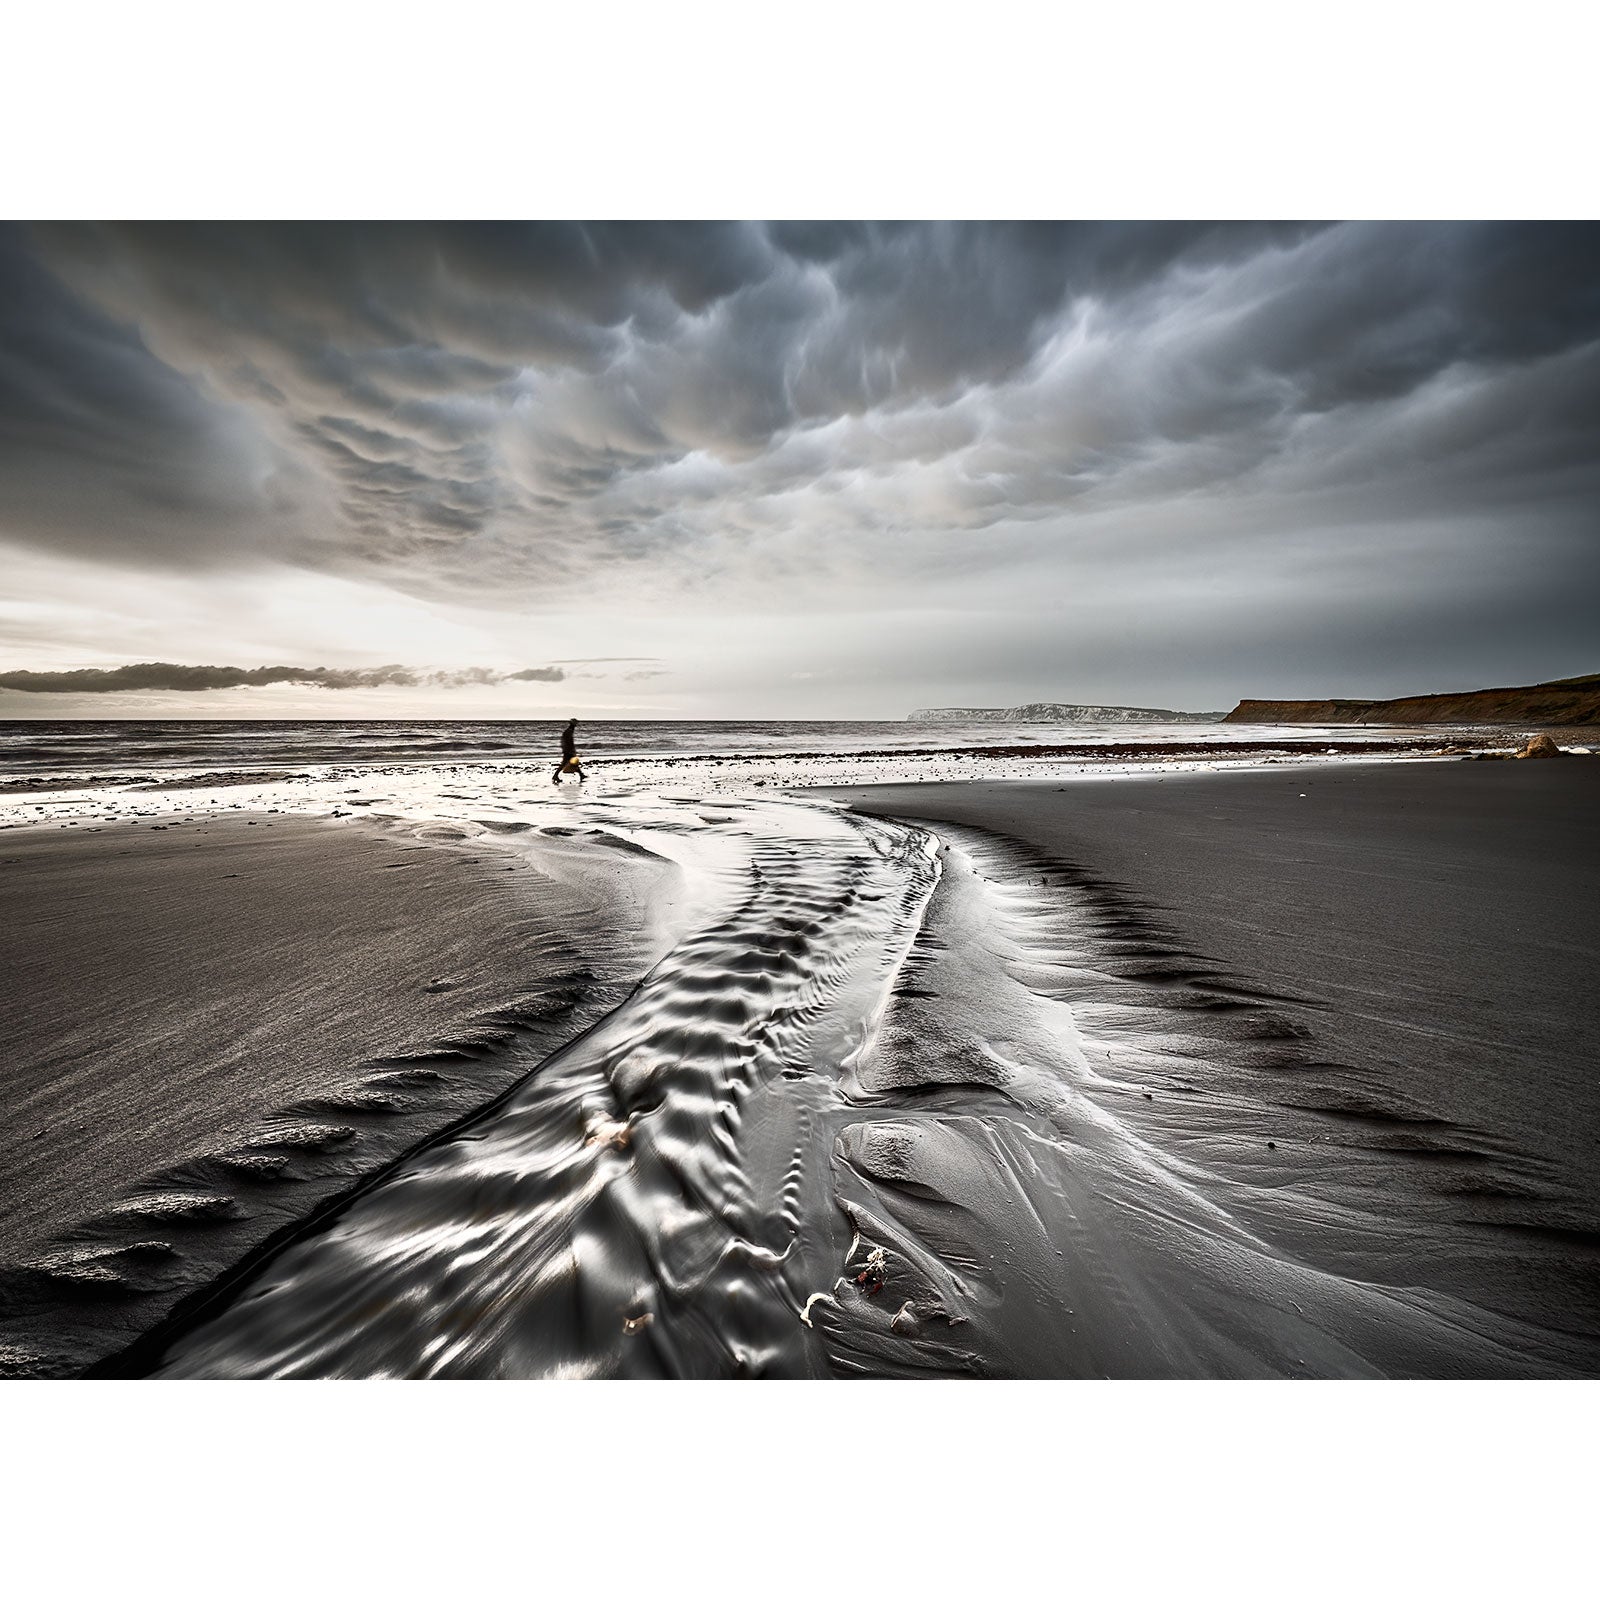 A solitary figure walks along Brook Bay beach on the Isle of Wight with rippling waters under a dramatic cloudy sky captured by Available Light Photography.